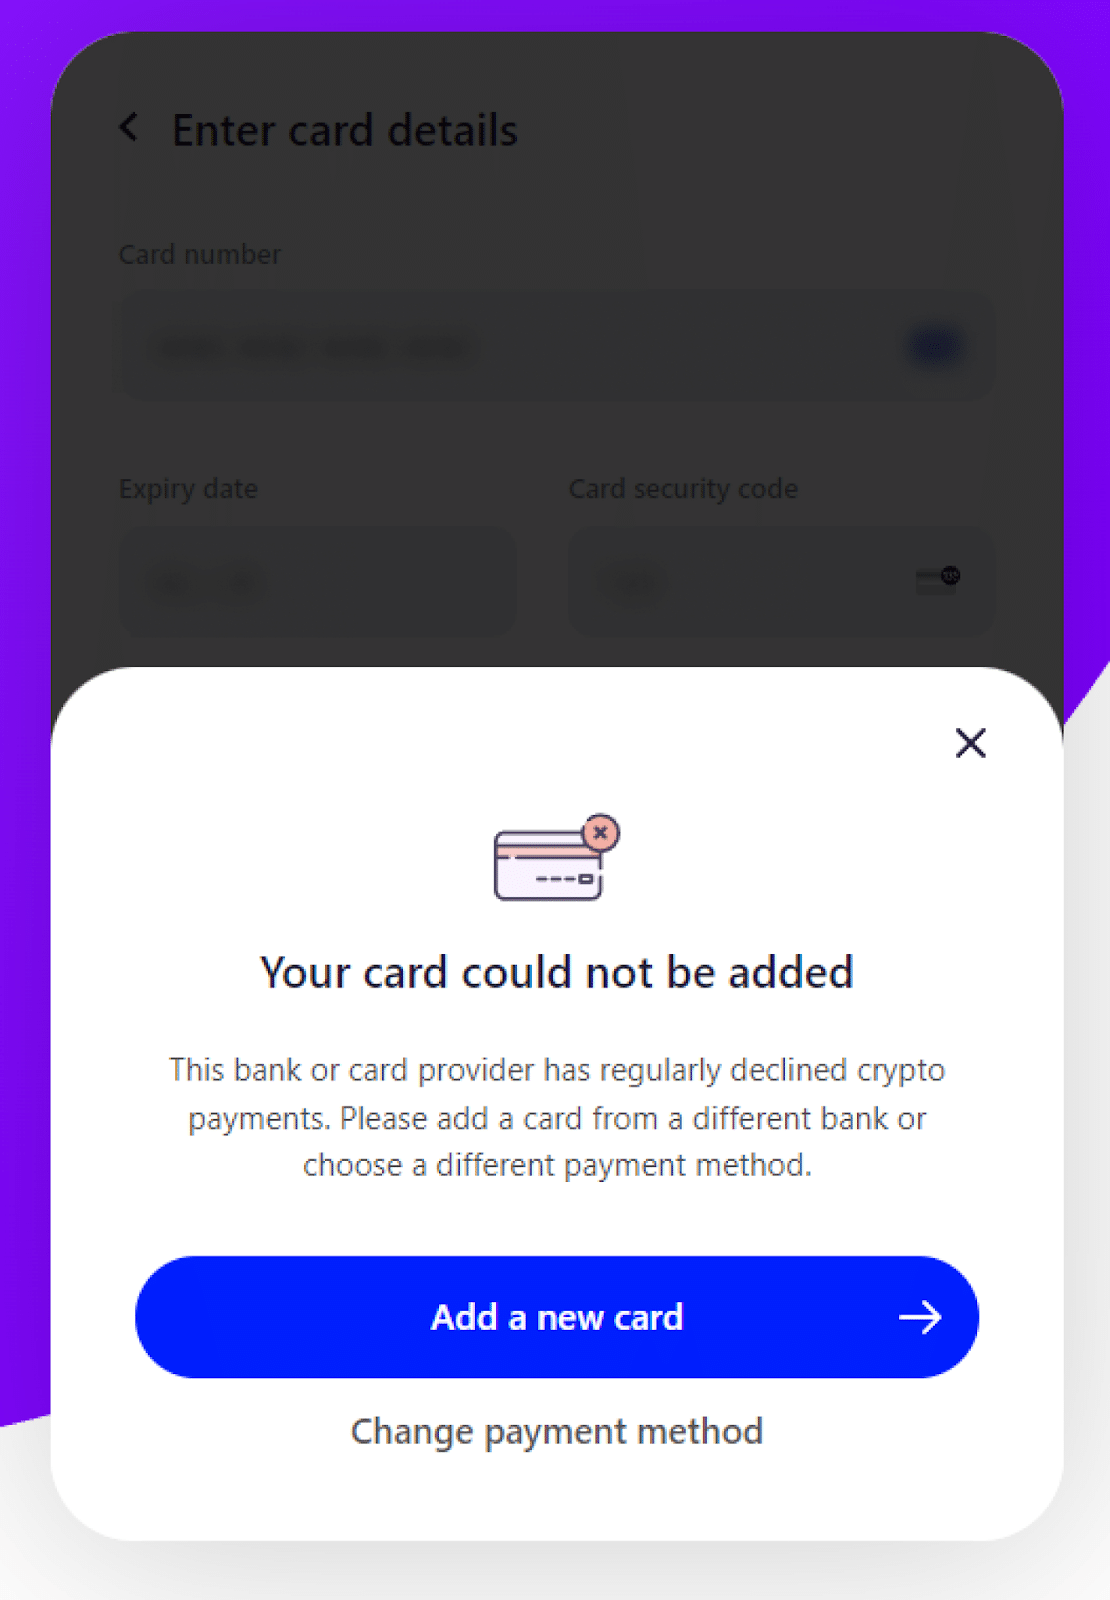 Card couldn't be added
